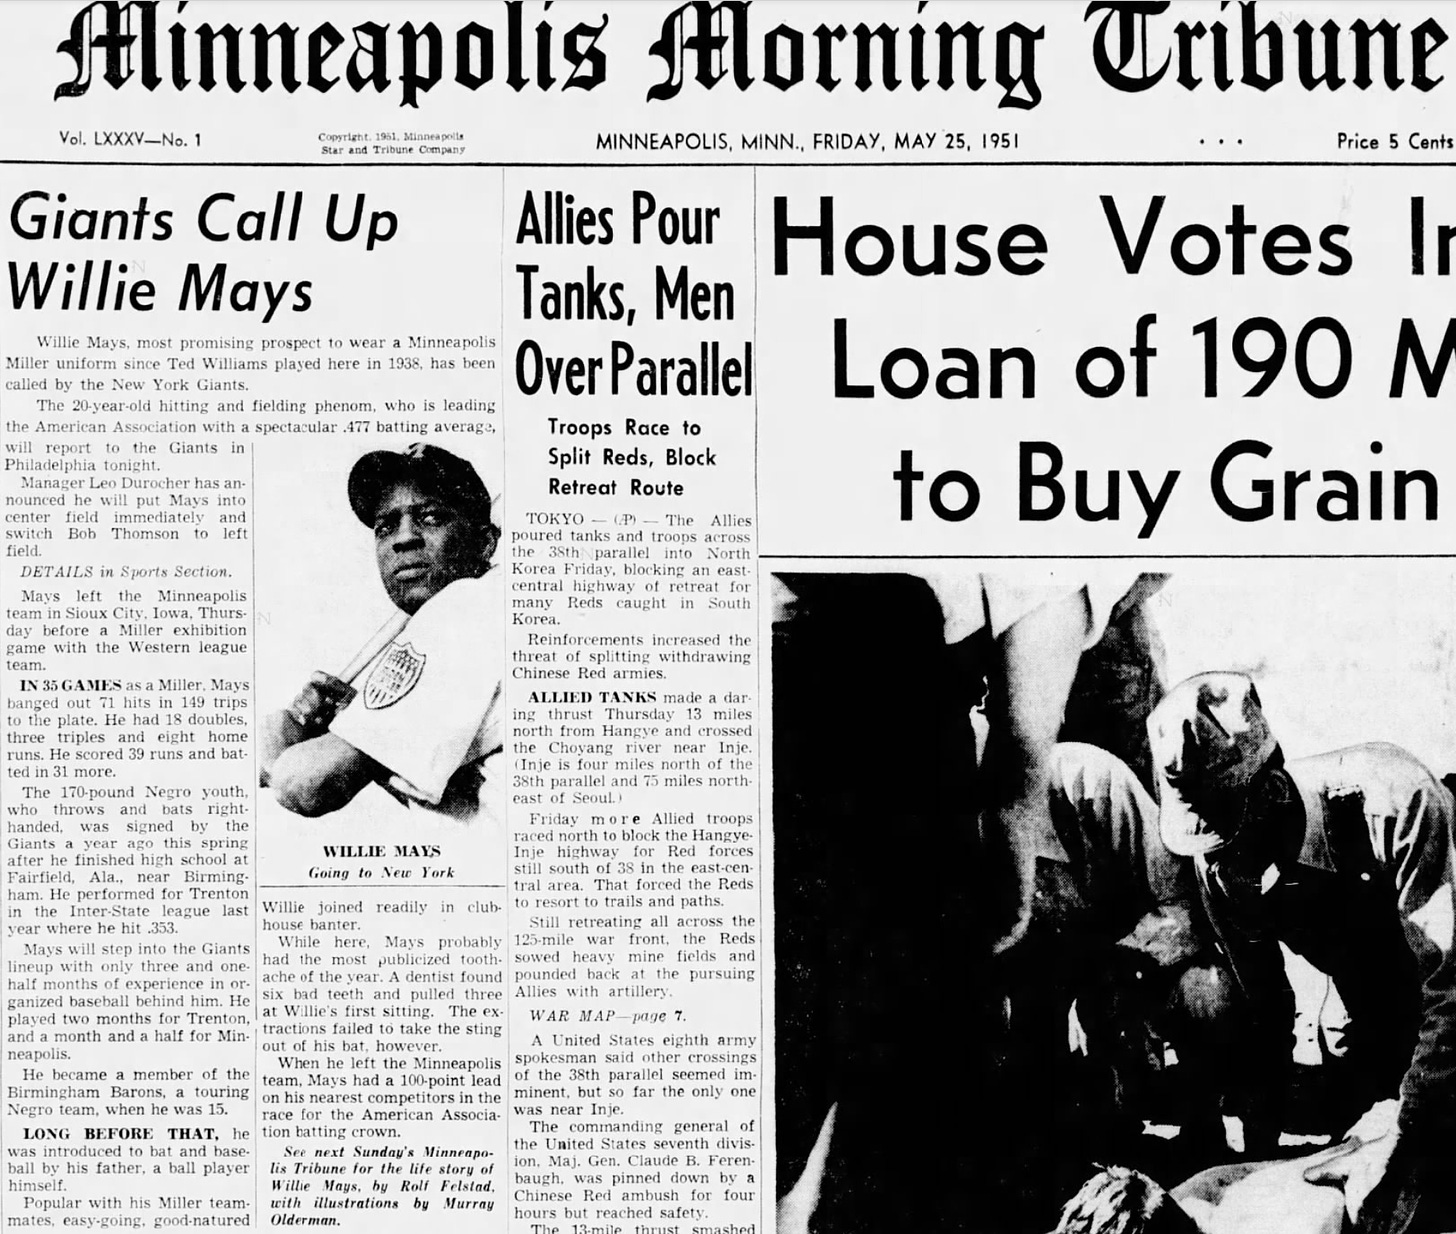 Willie Mays Call Up 1951 Minneapolis Morning Tribune